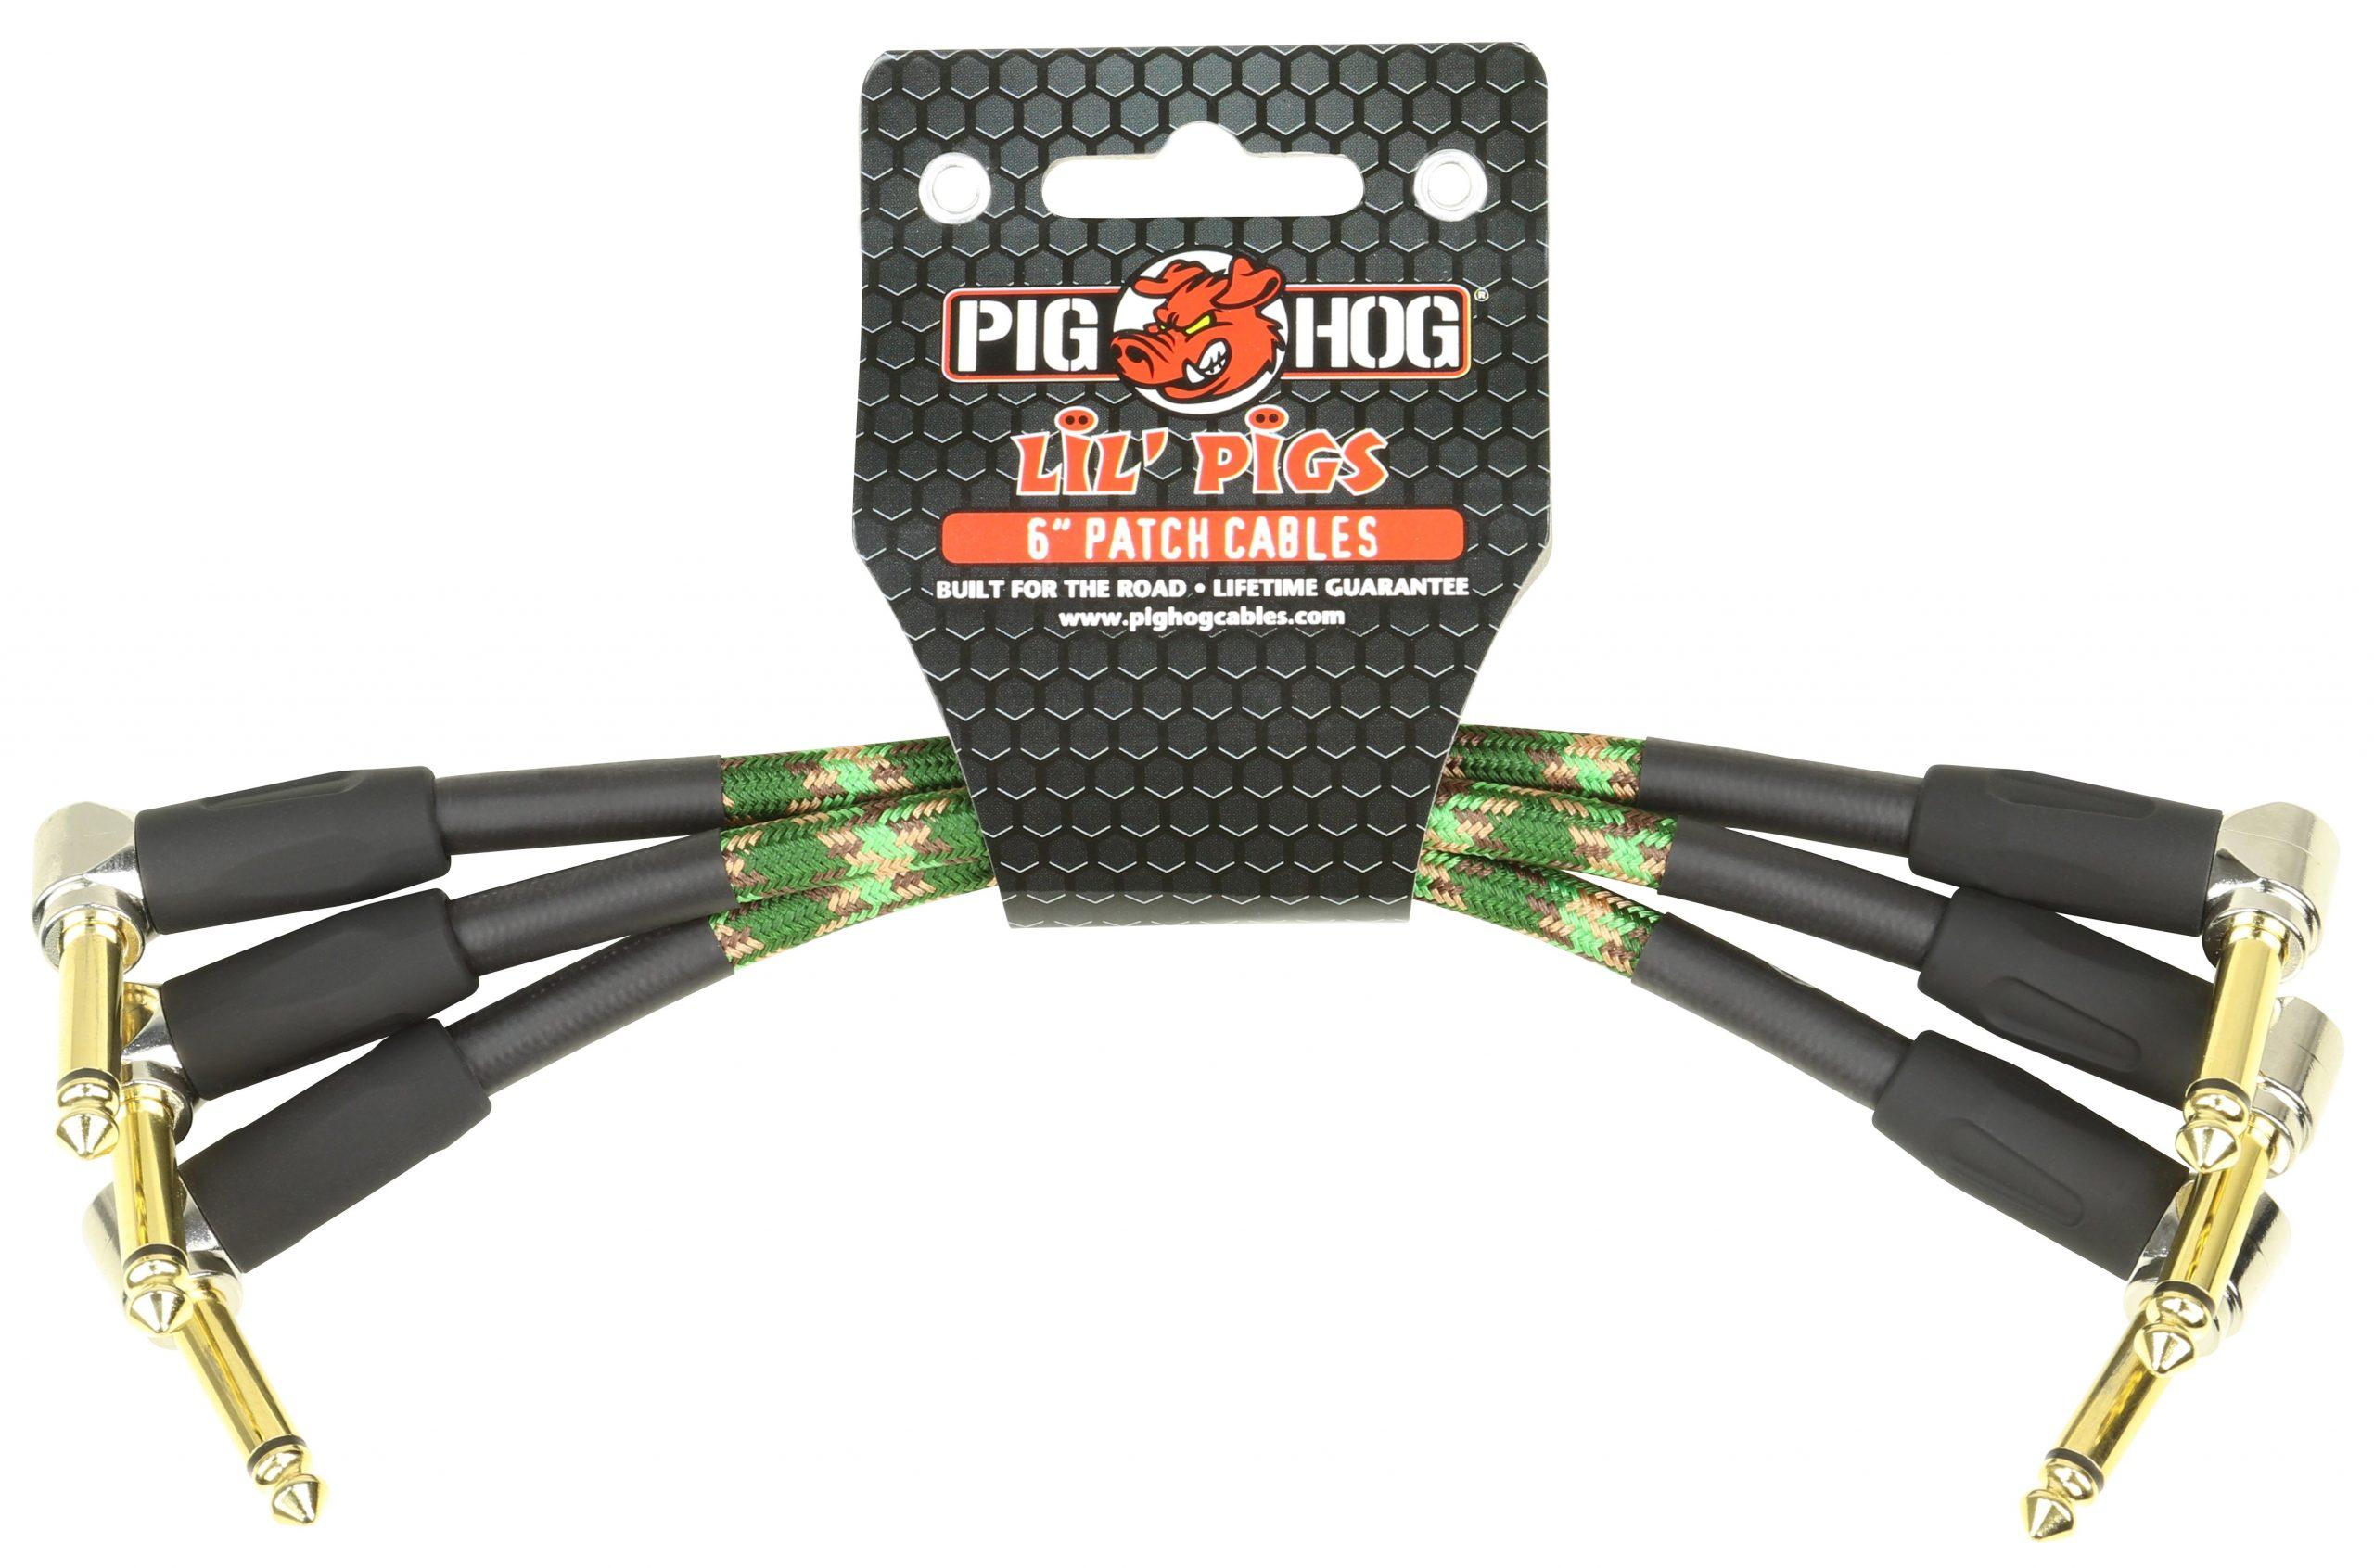 Pig Hog Lil Pigs Vintage "Camouflage" 6in Patch Cables - 3 pack